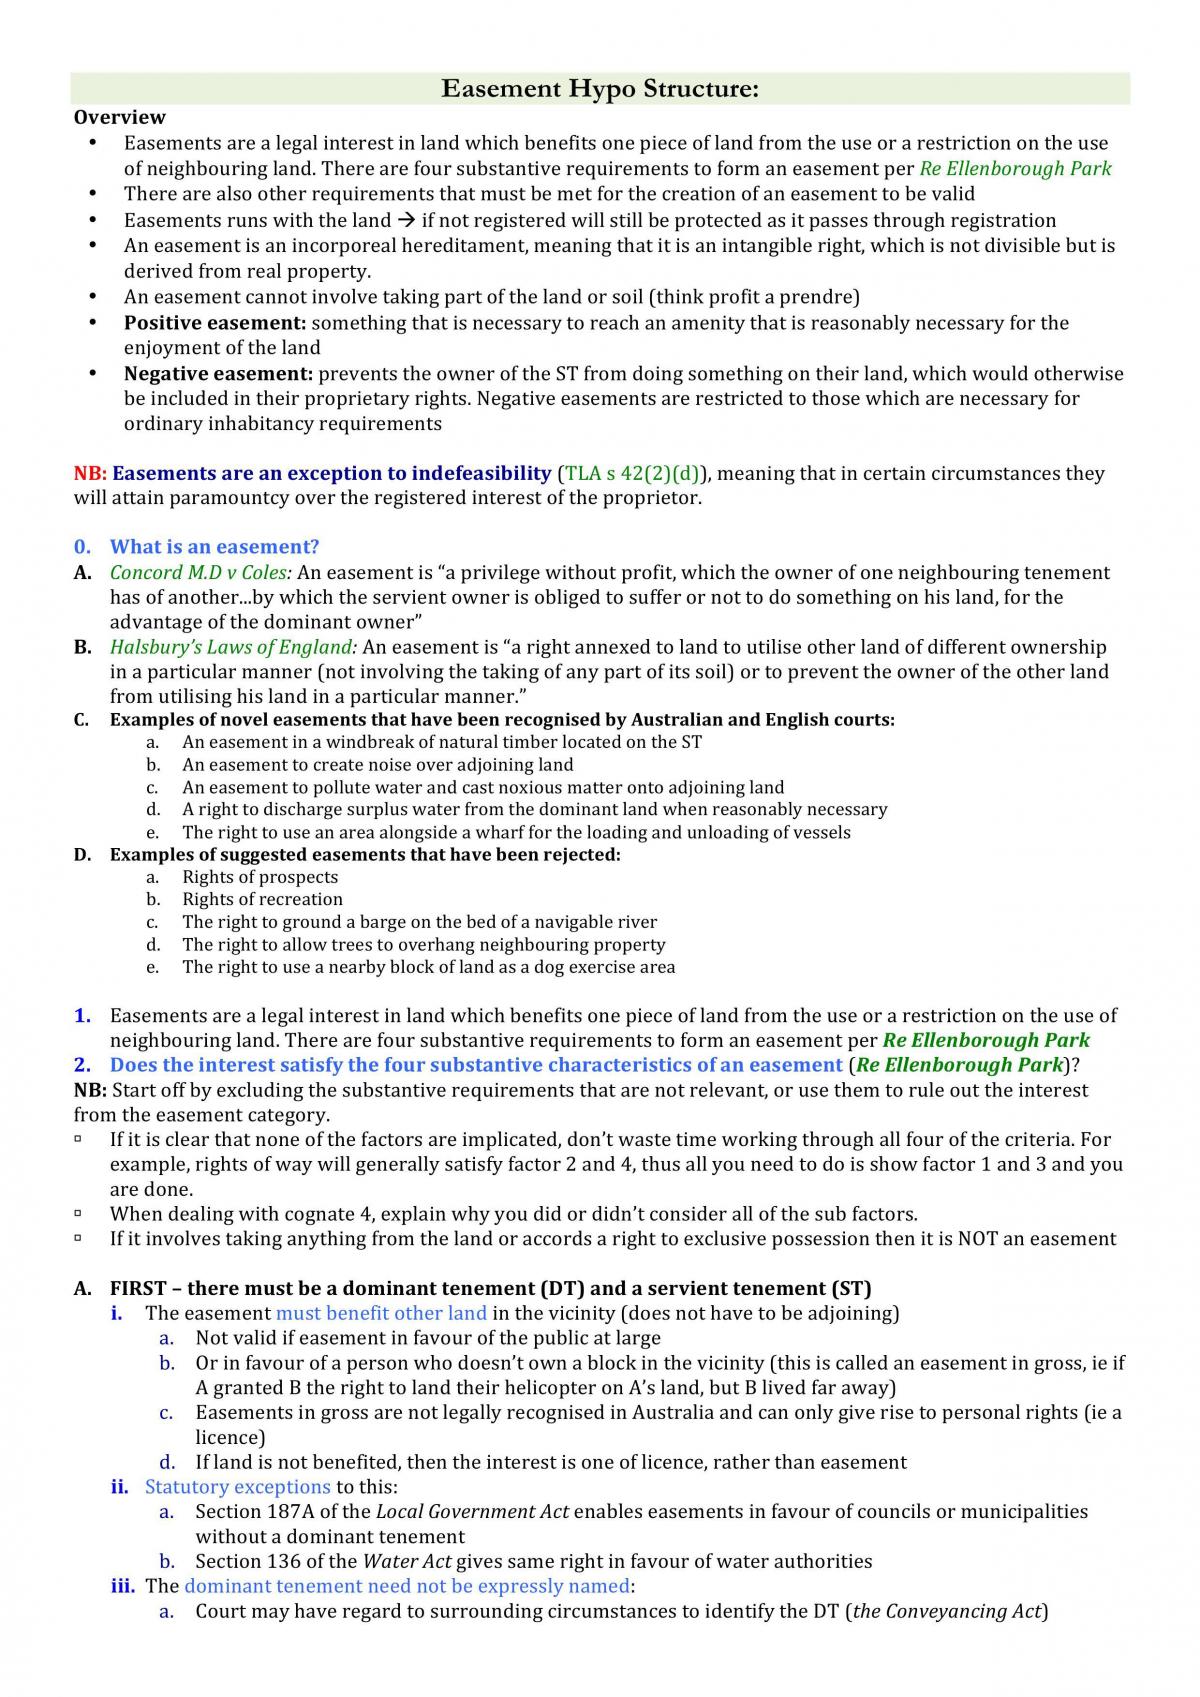 Easements and Profit a Prendre Notes - Page 1